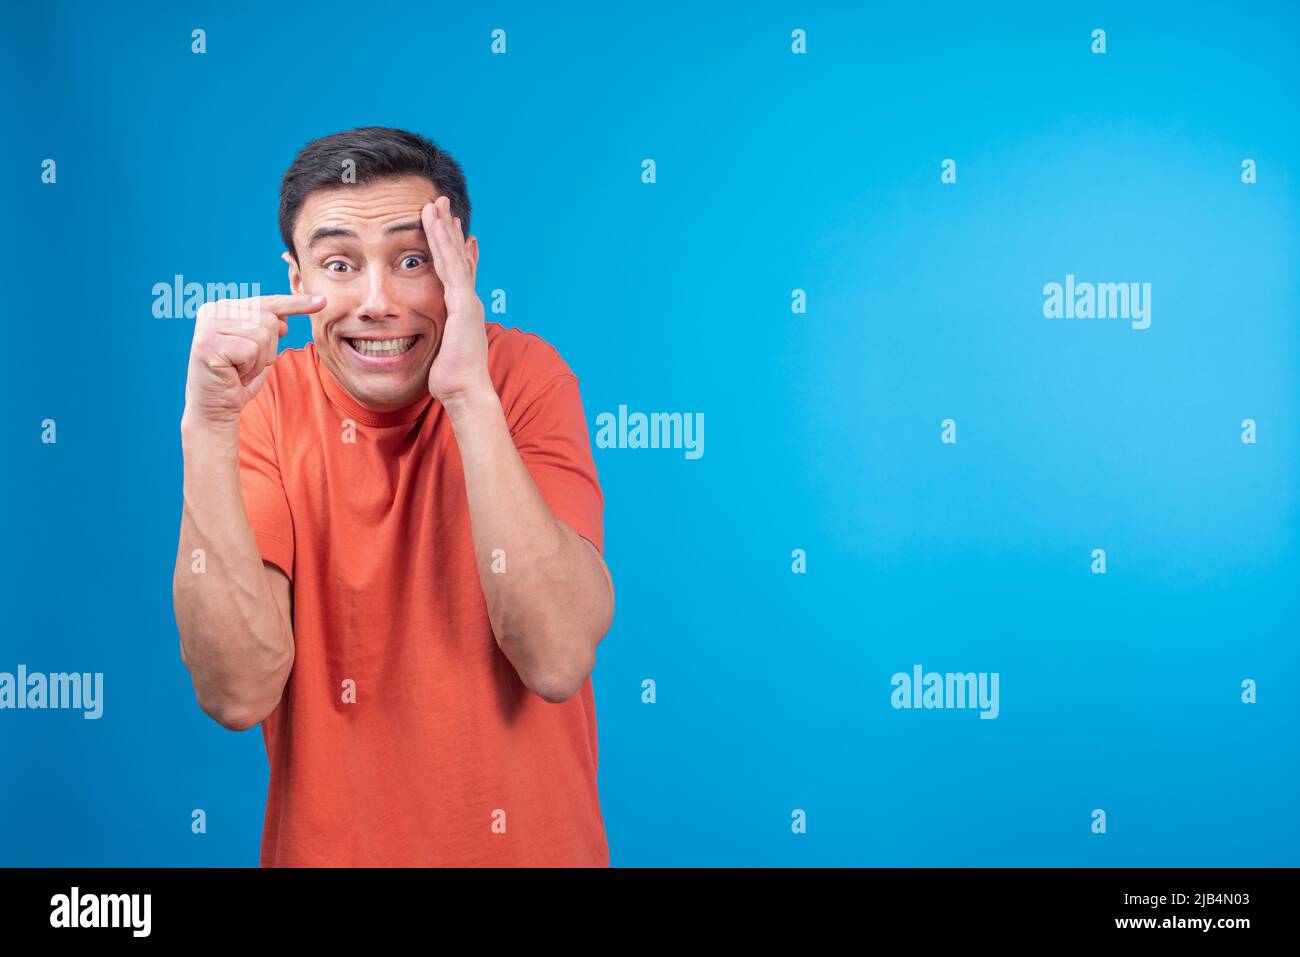 Ashamed man covering face and pointing away Stock Photo